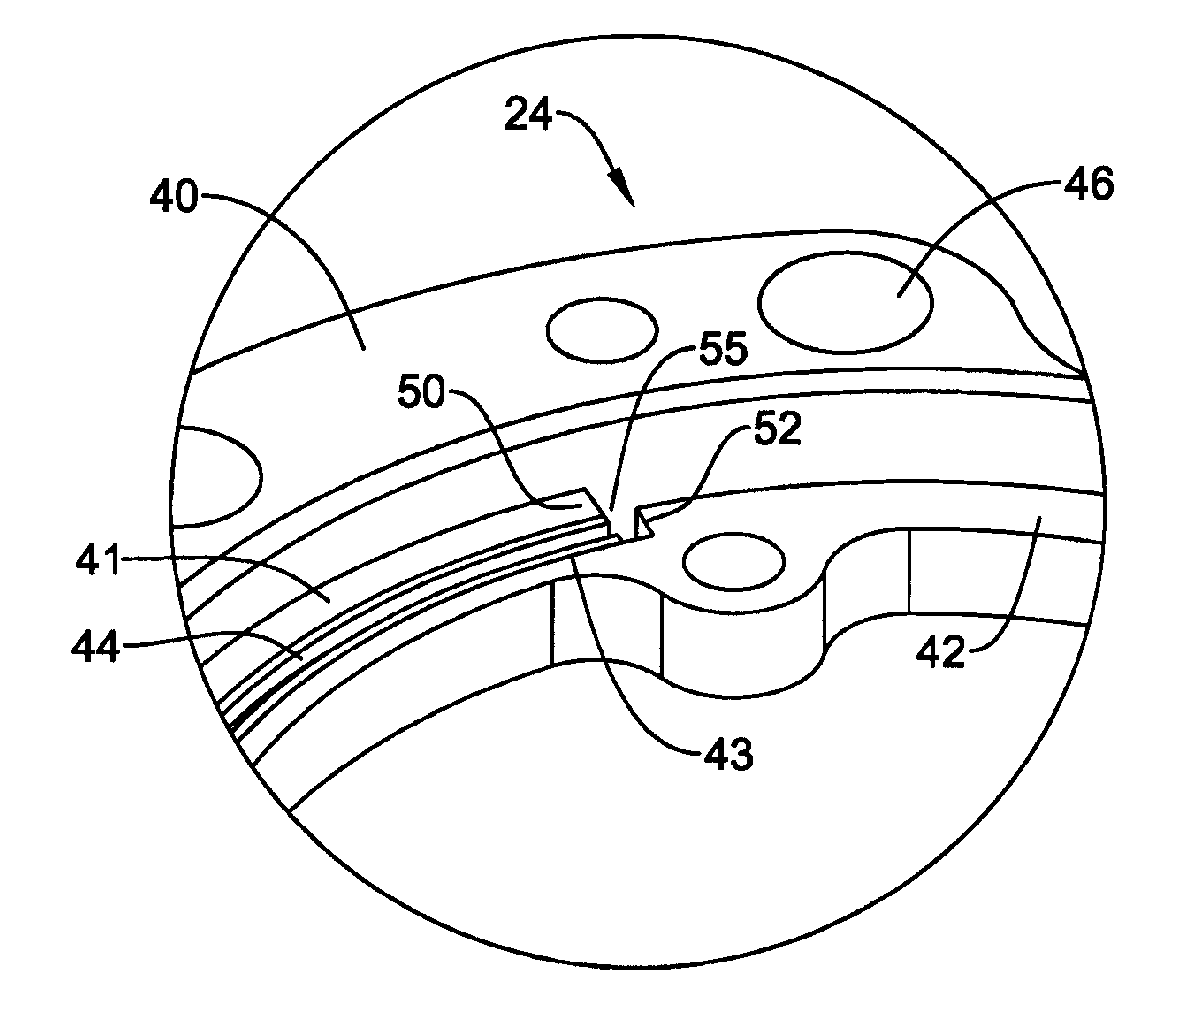 Isolation system for an inertial measurement unit